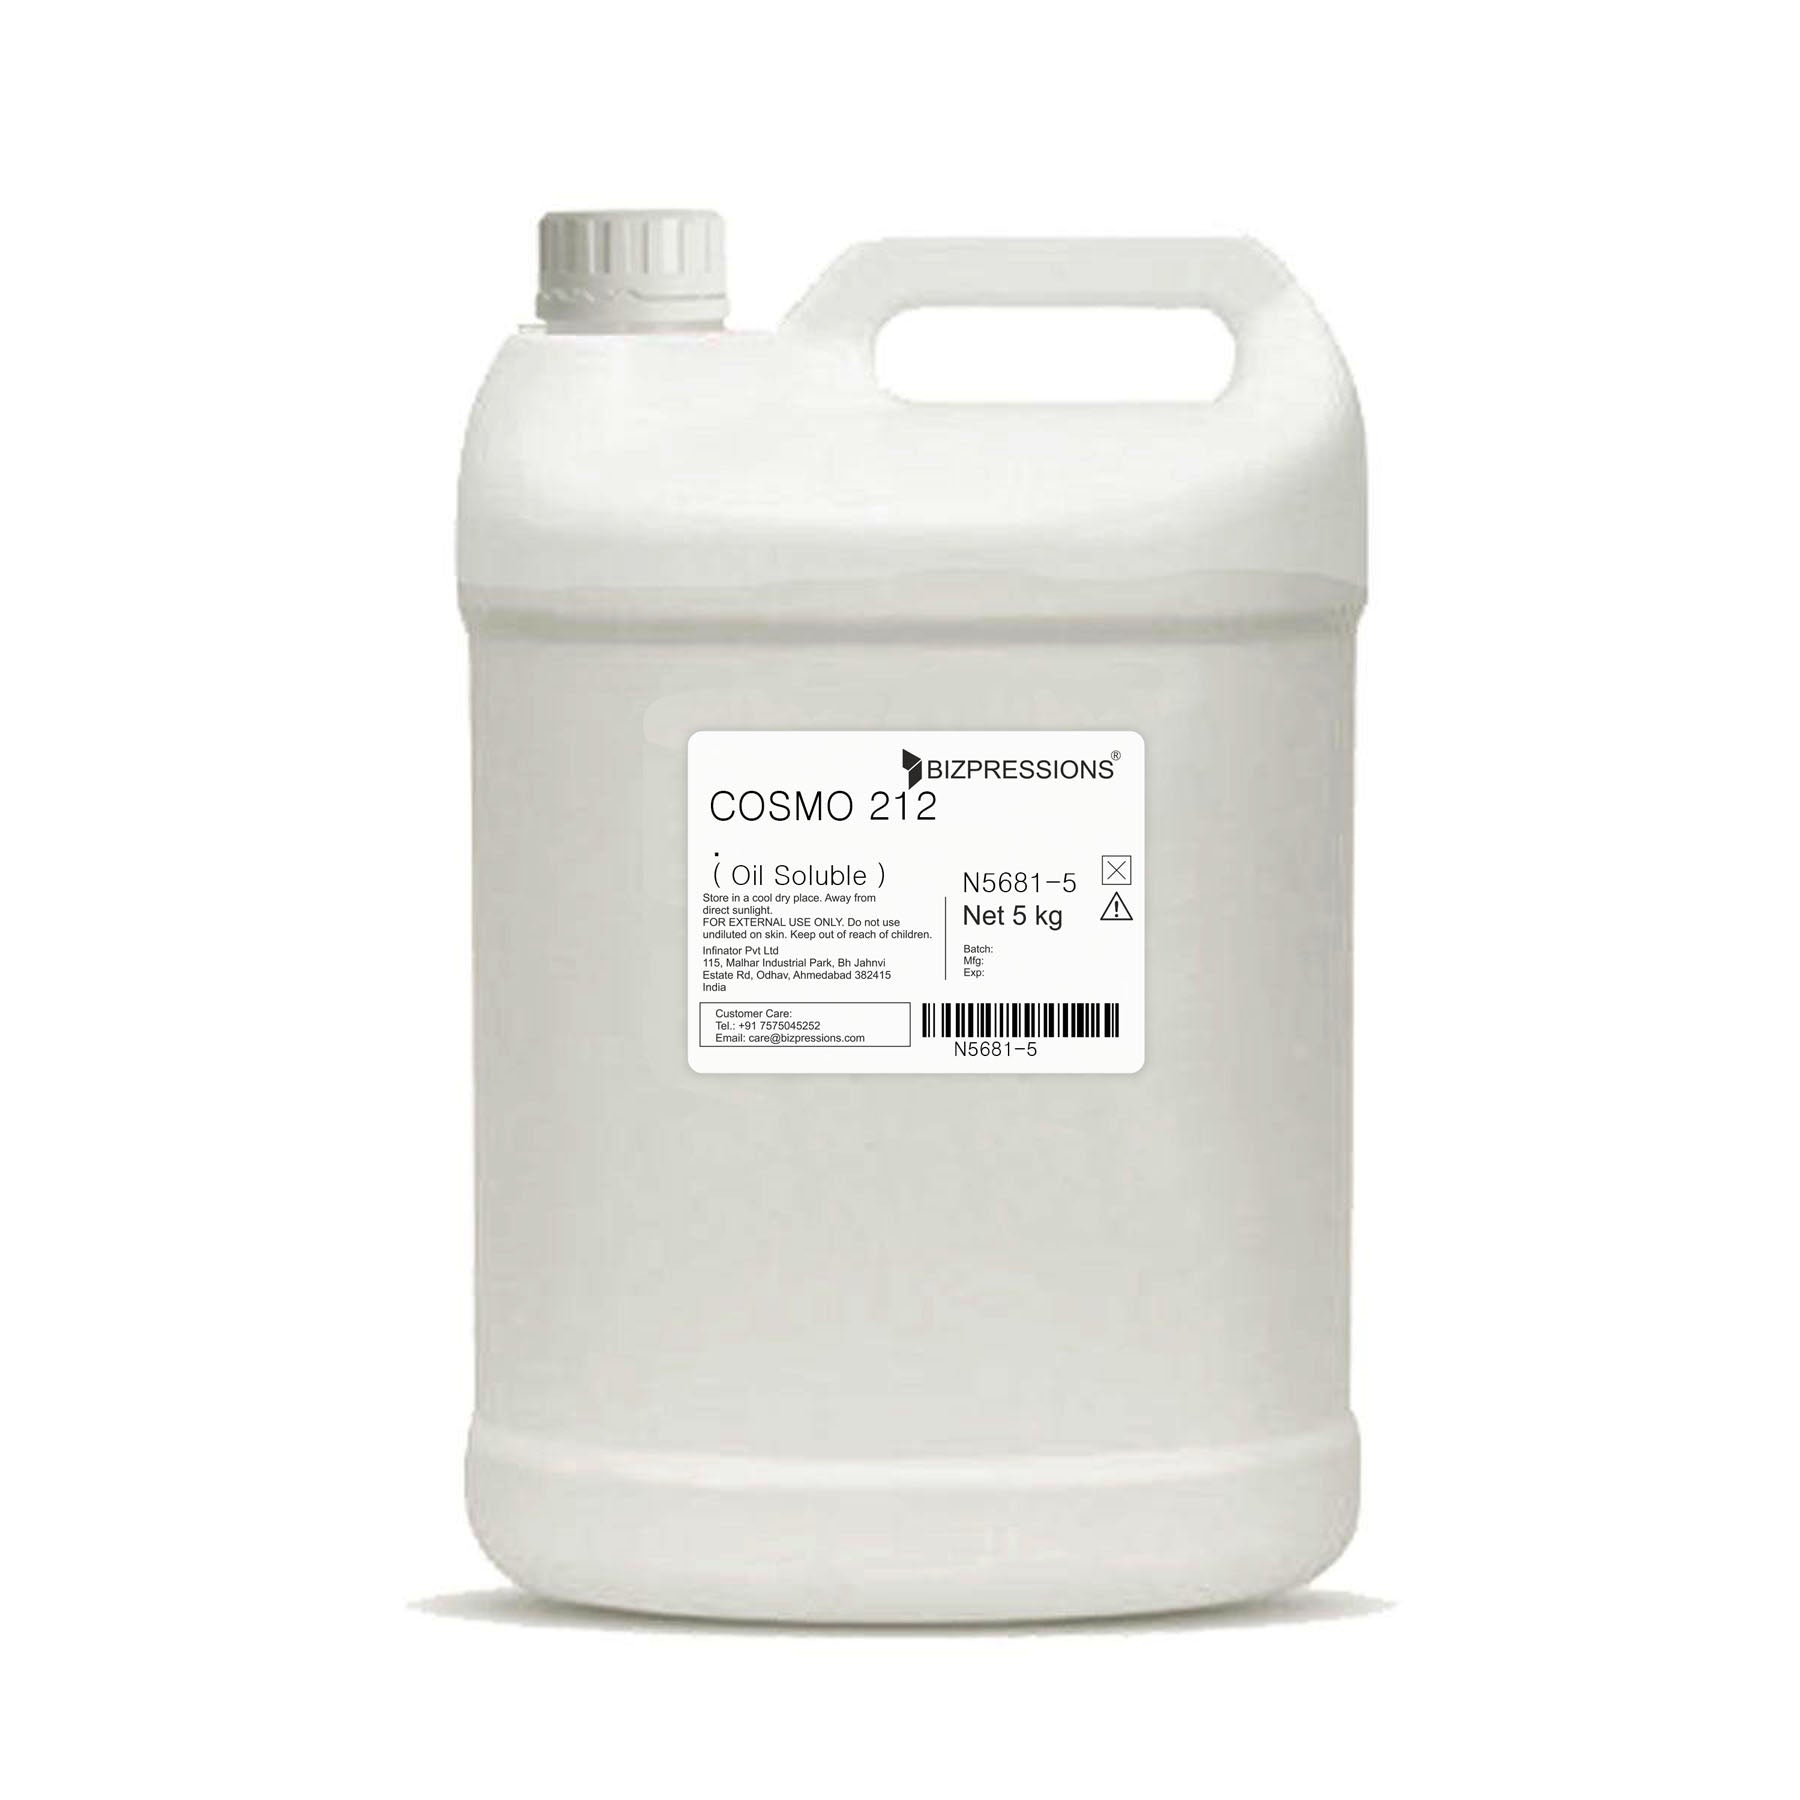 COSMO 212 - Fragrance ( Oil Soluble ) - 5 kg